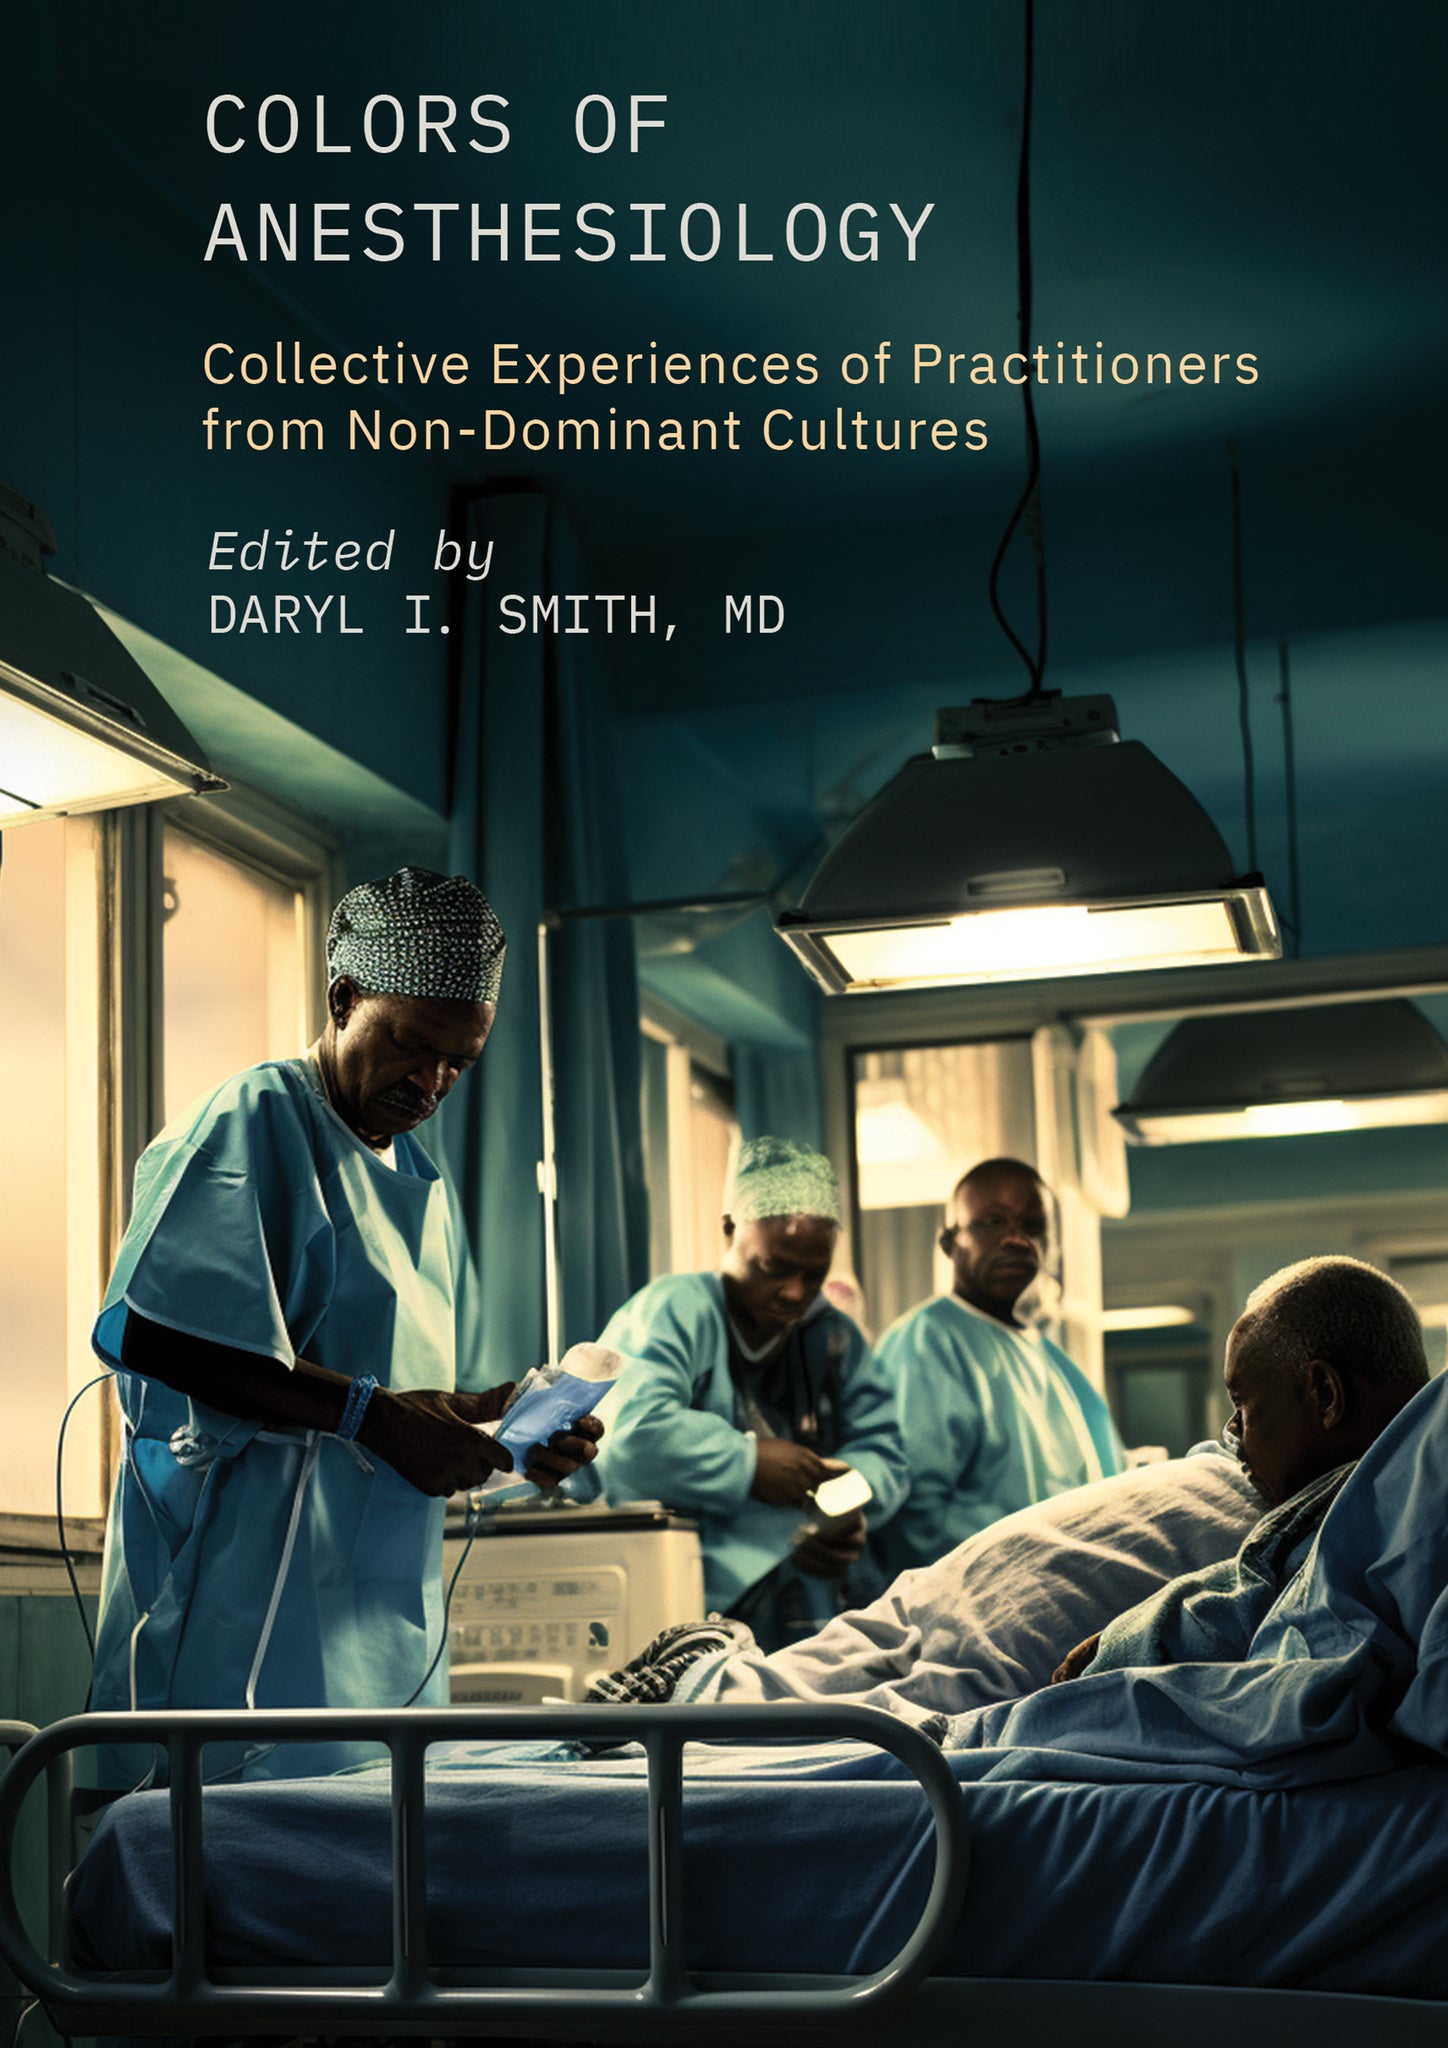 Colors of Anesthesiology: Collective Experiences of Practitioners from Non-Dominant Cultures